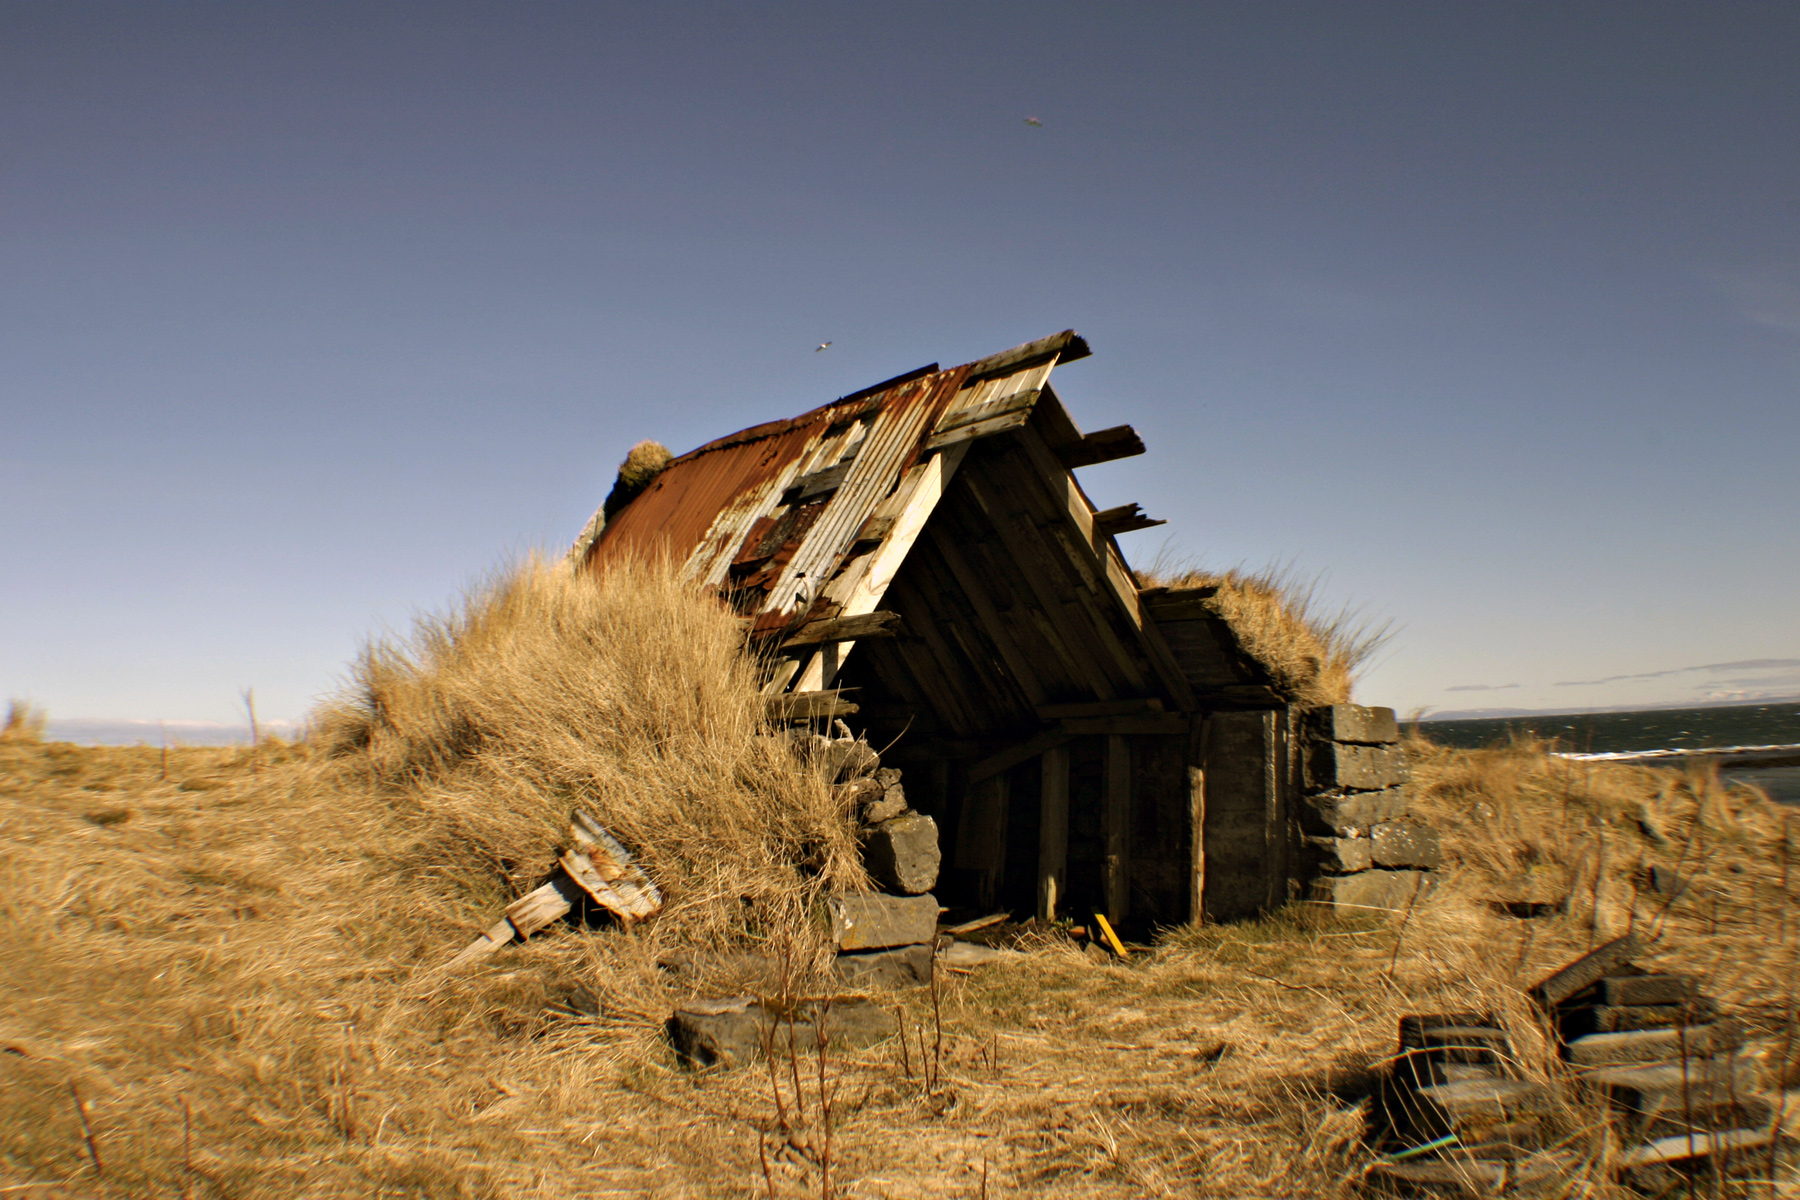 Old shack, Abandoned, Grass, House, Old, HQ Photo